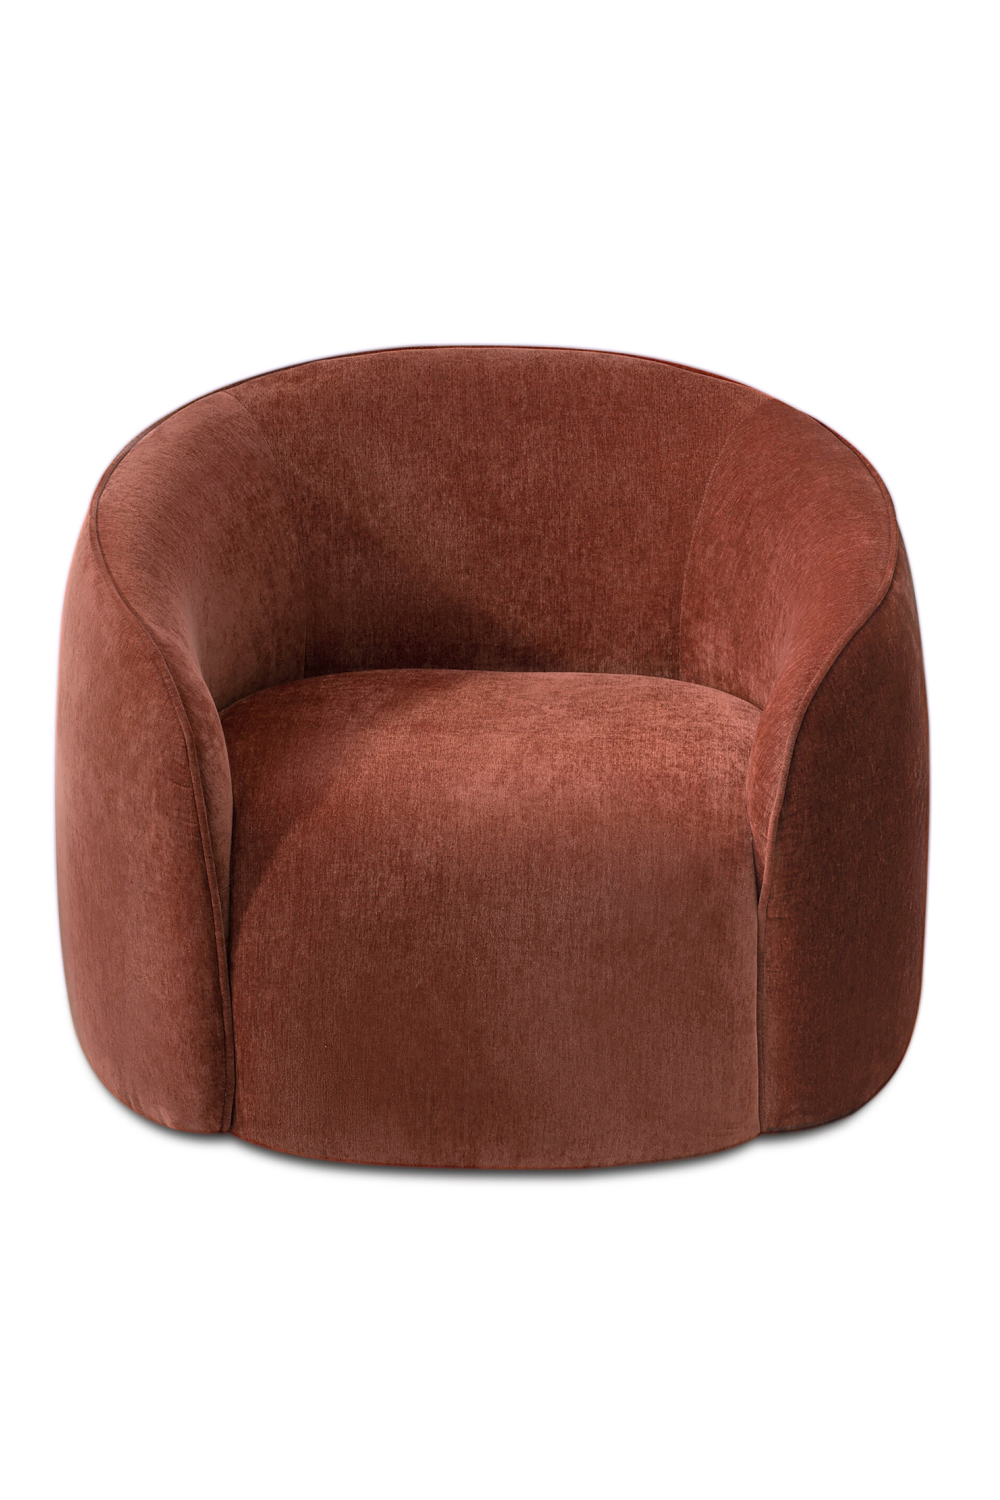 Rust Rounded Occasional Chair | Liang & Eimil Polta | Oroa.com